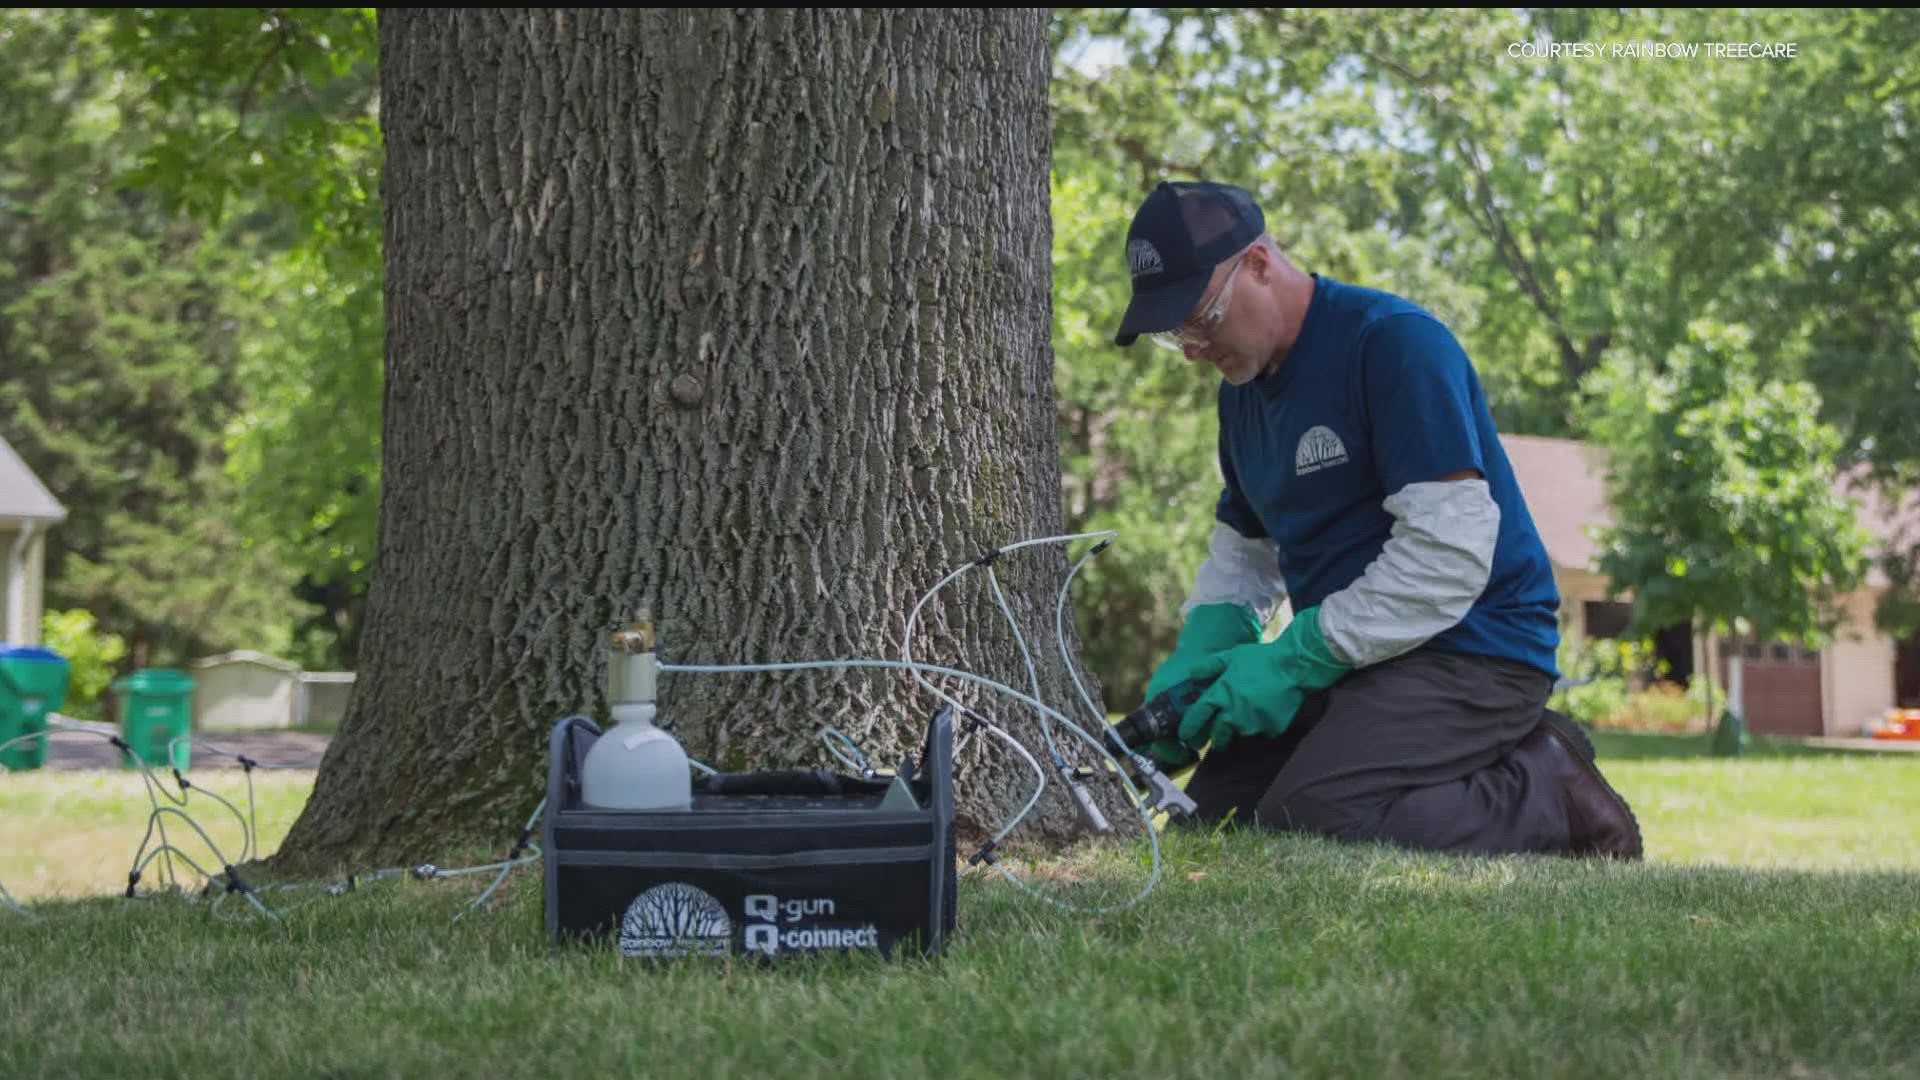 Minnesota now has 35 counties that have reported the bug, which can eat away at trees for years before symptoms become visible.